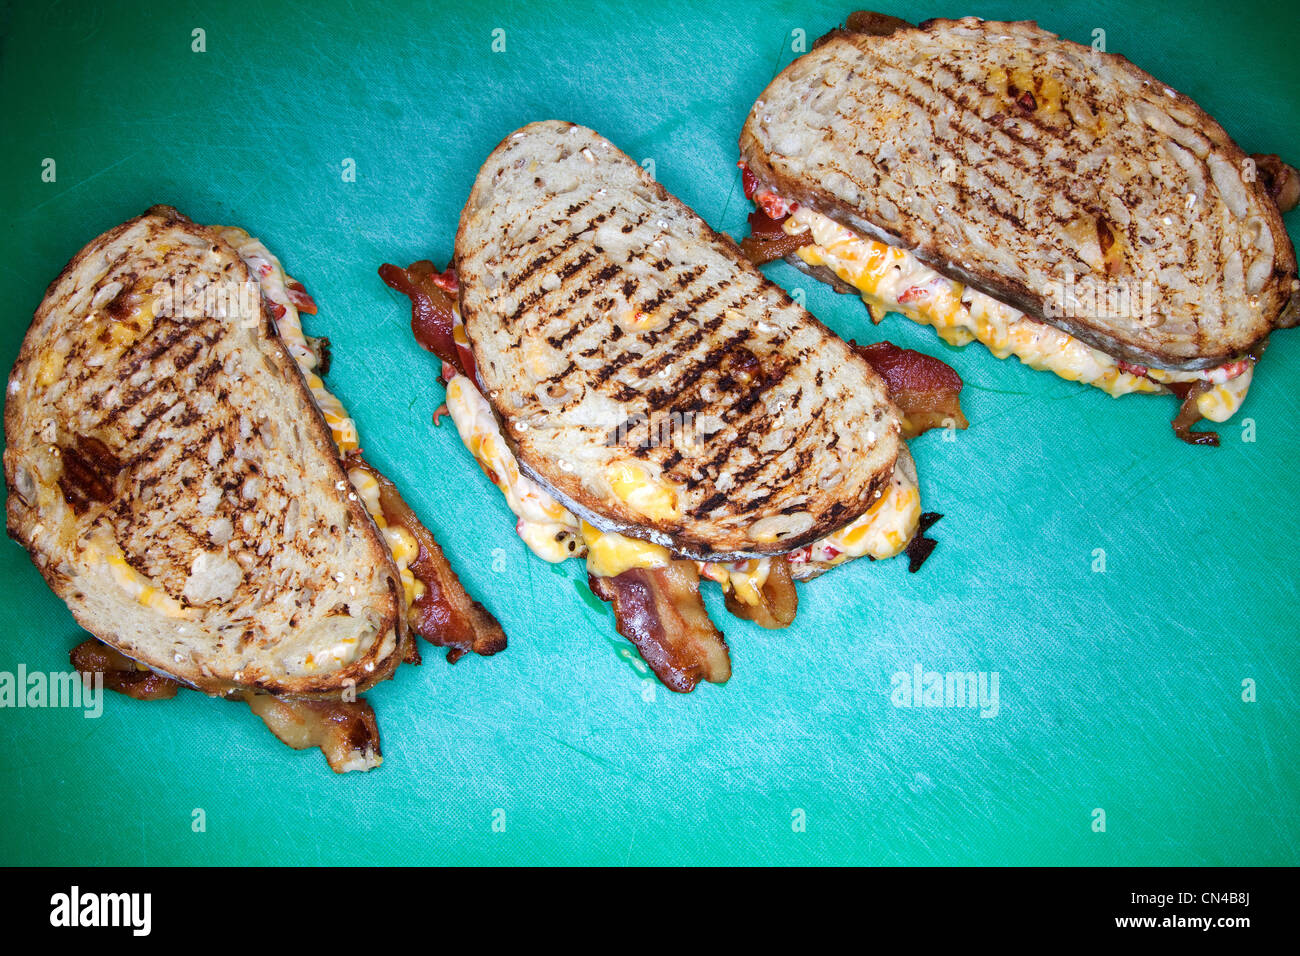 Three grilled cheese sandwiches Stock Photo